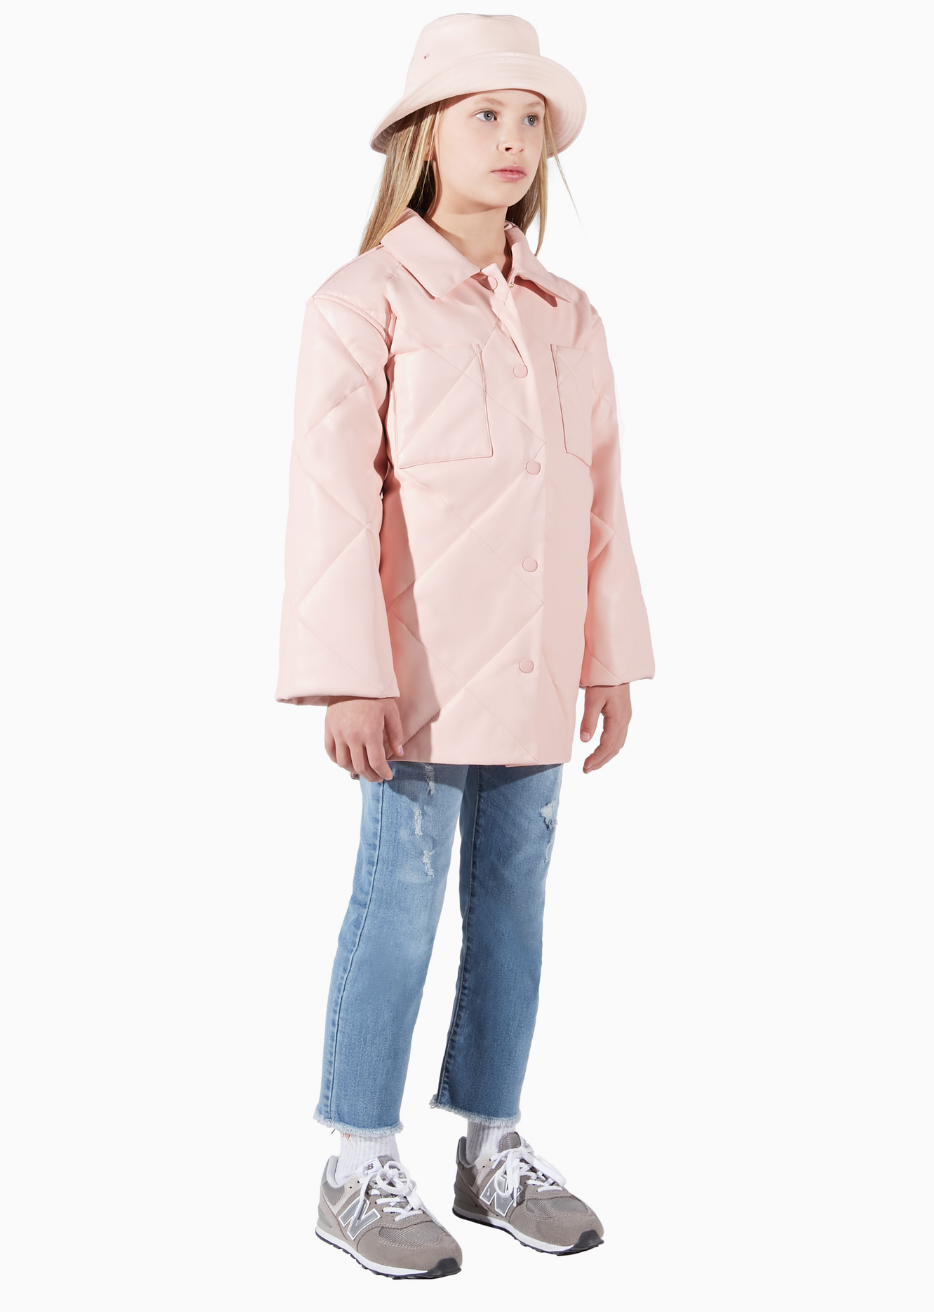 Charlie Rose Pink Made in Canada Animal Free Ethical Leather Quilted Vegan Shacket for Kids